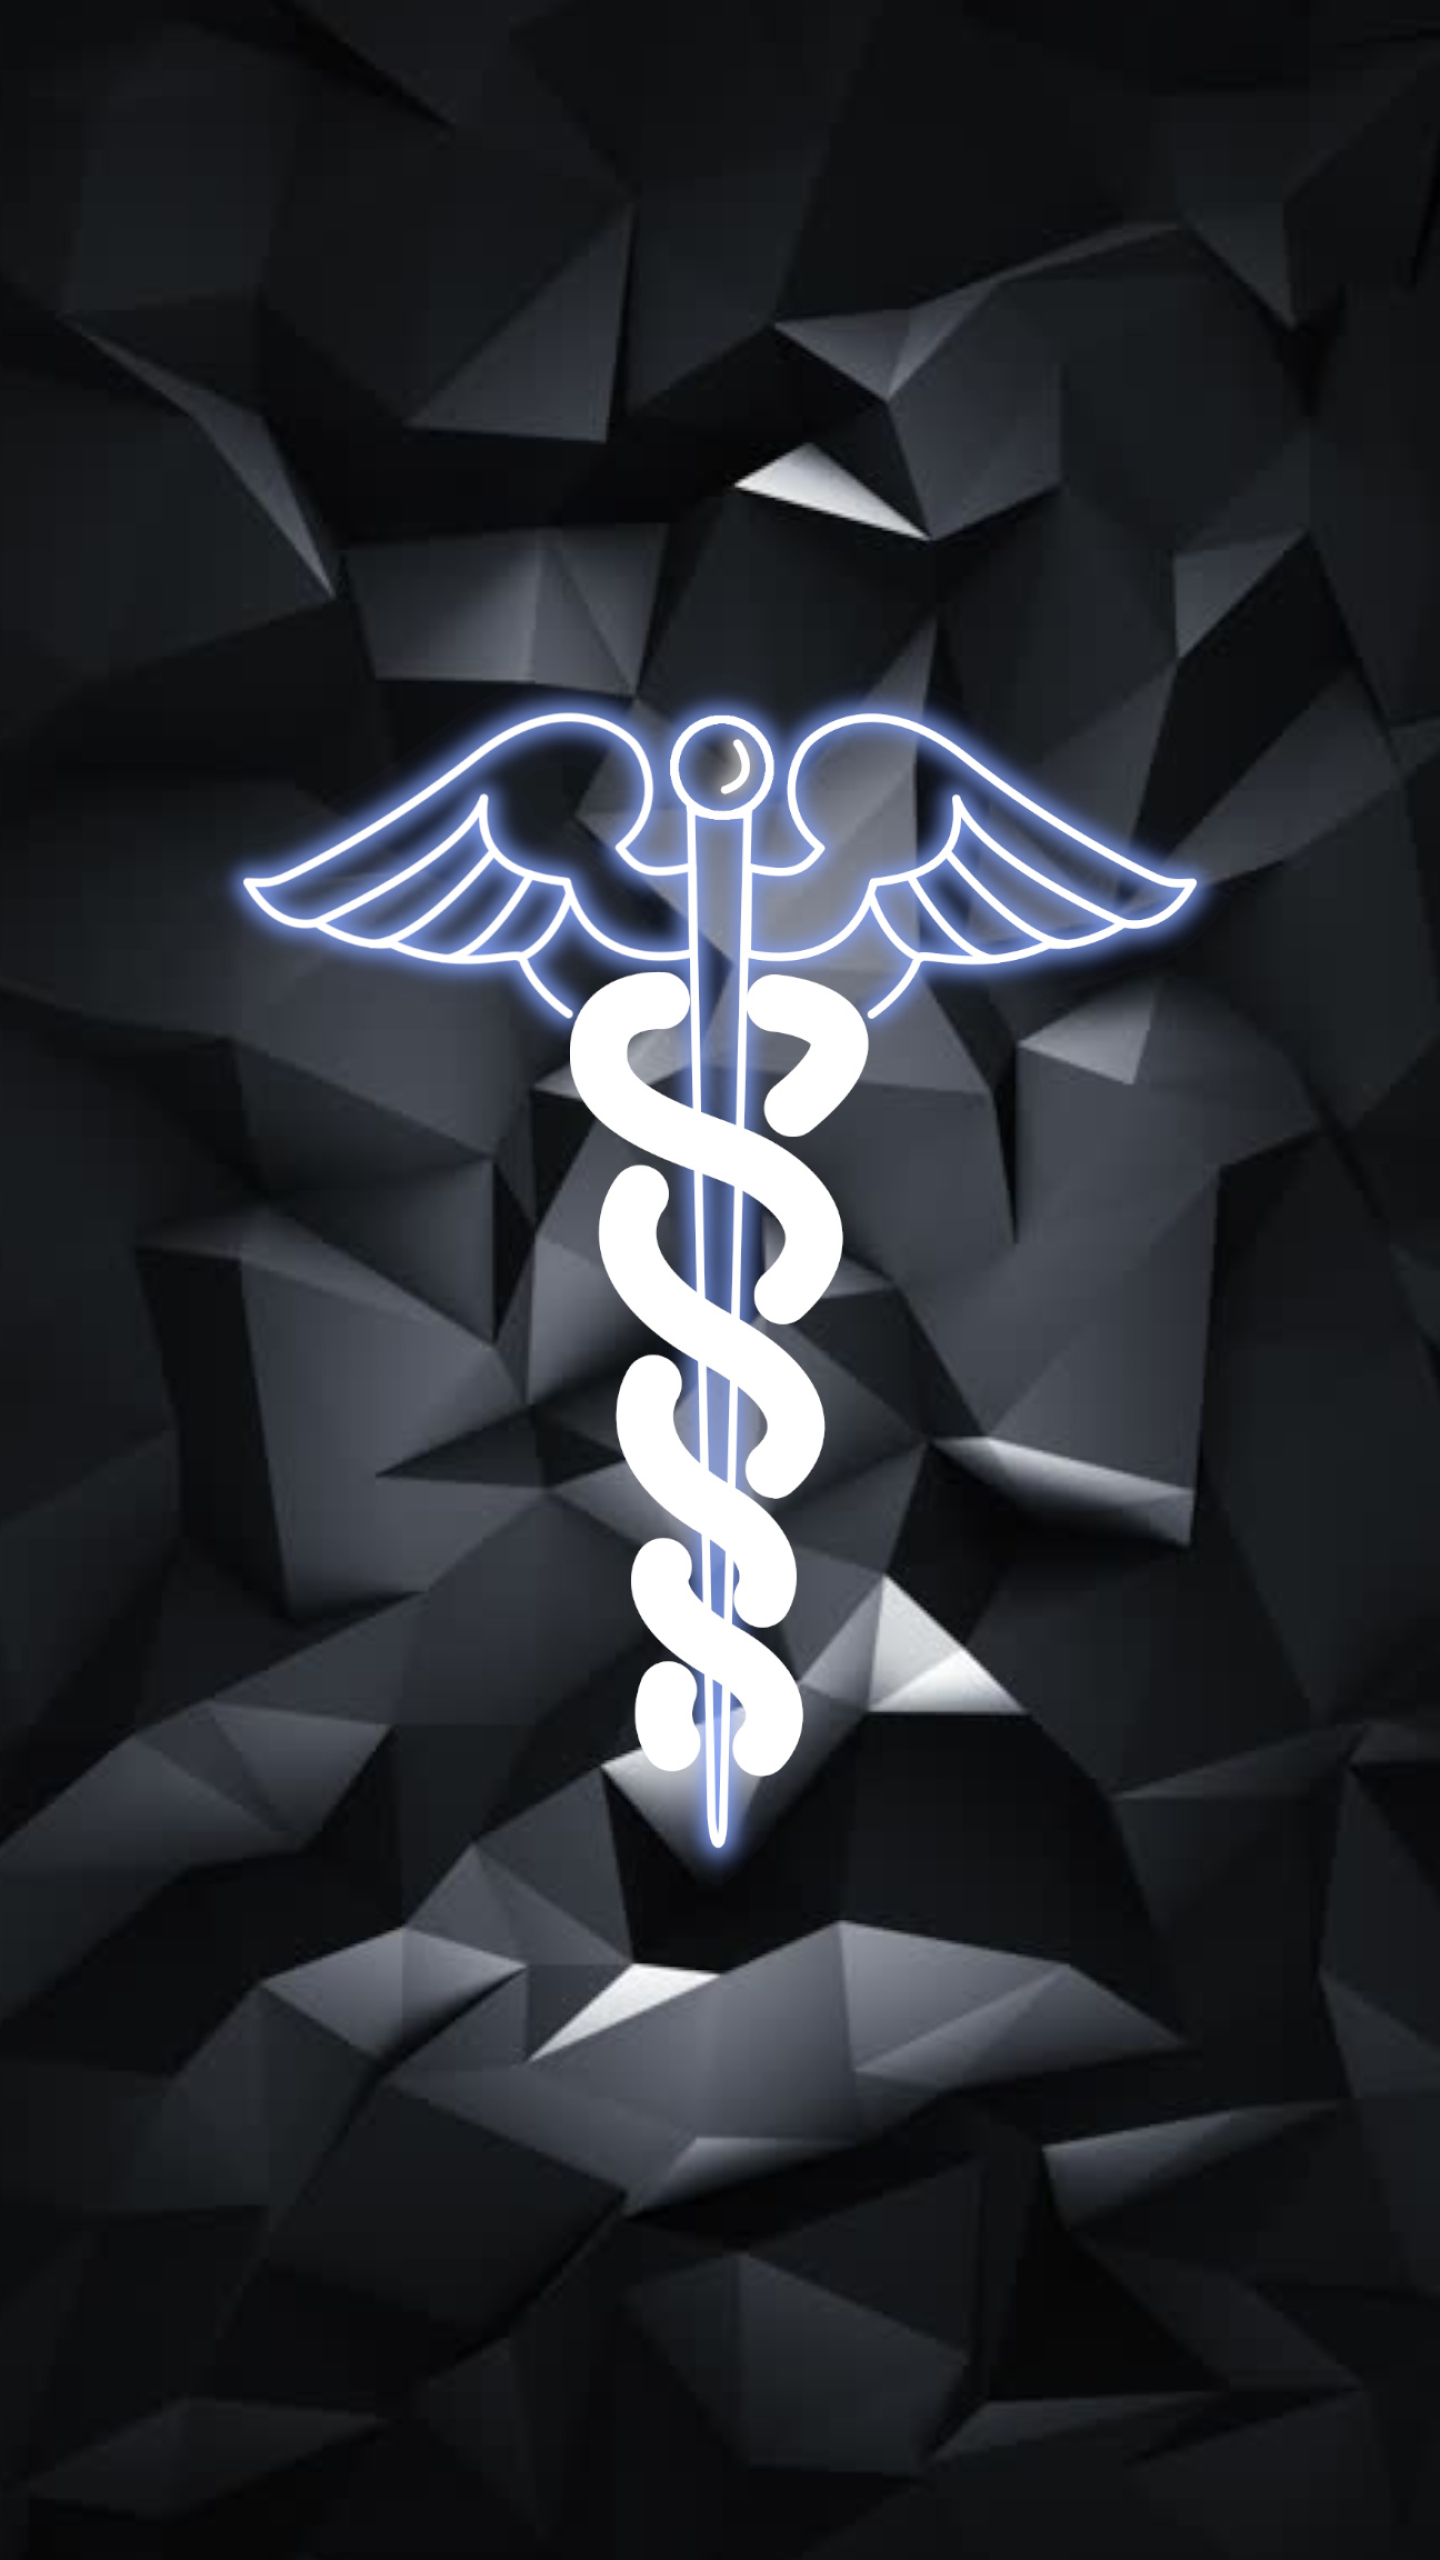 Android medical wallpaper, Health-related design, Medical-inspired visuals, Tech backgrounds, 1440x2560 HD Phone